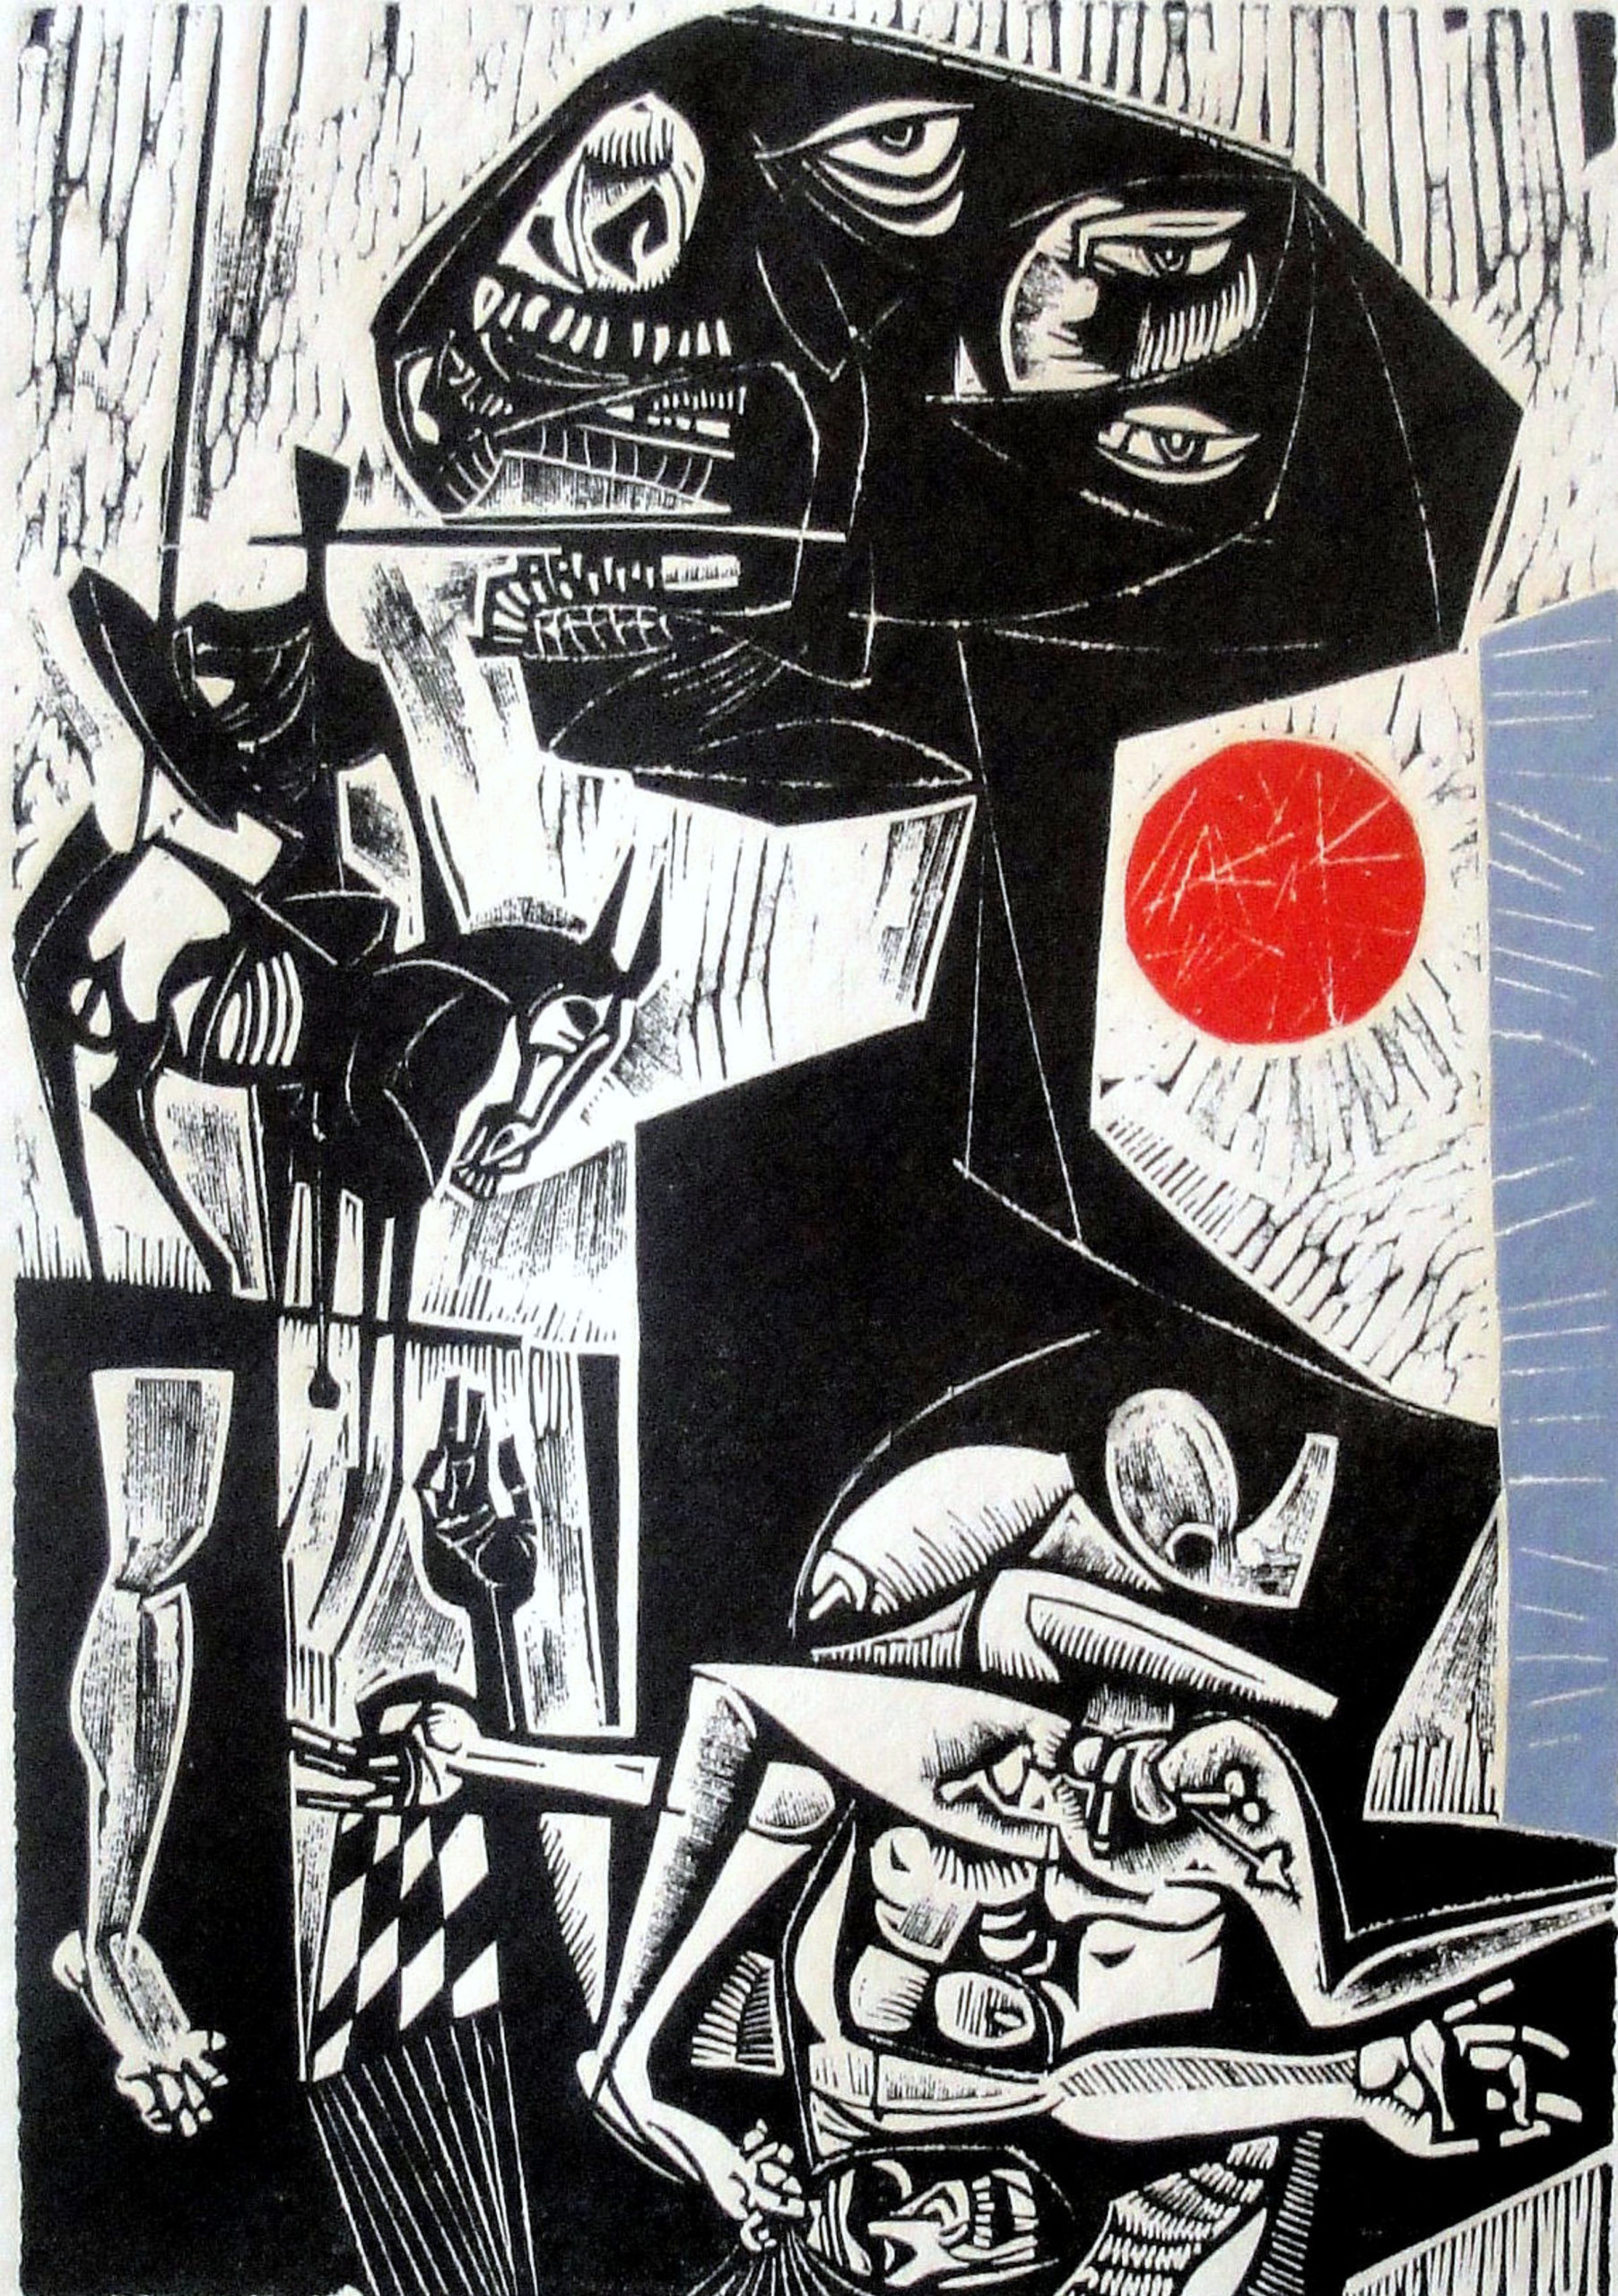 Vincent Hložník (Slovak, 1919-1997), Untitled, from Dreams, 1962, linocut, 23 5/8 X 16 3/8 inches. HHAR 1407. The Art Collection at The Hebrew Home at Riverdale.